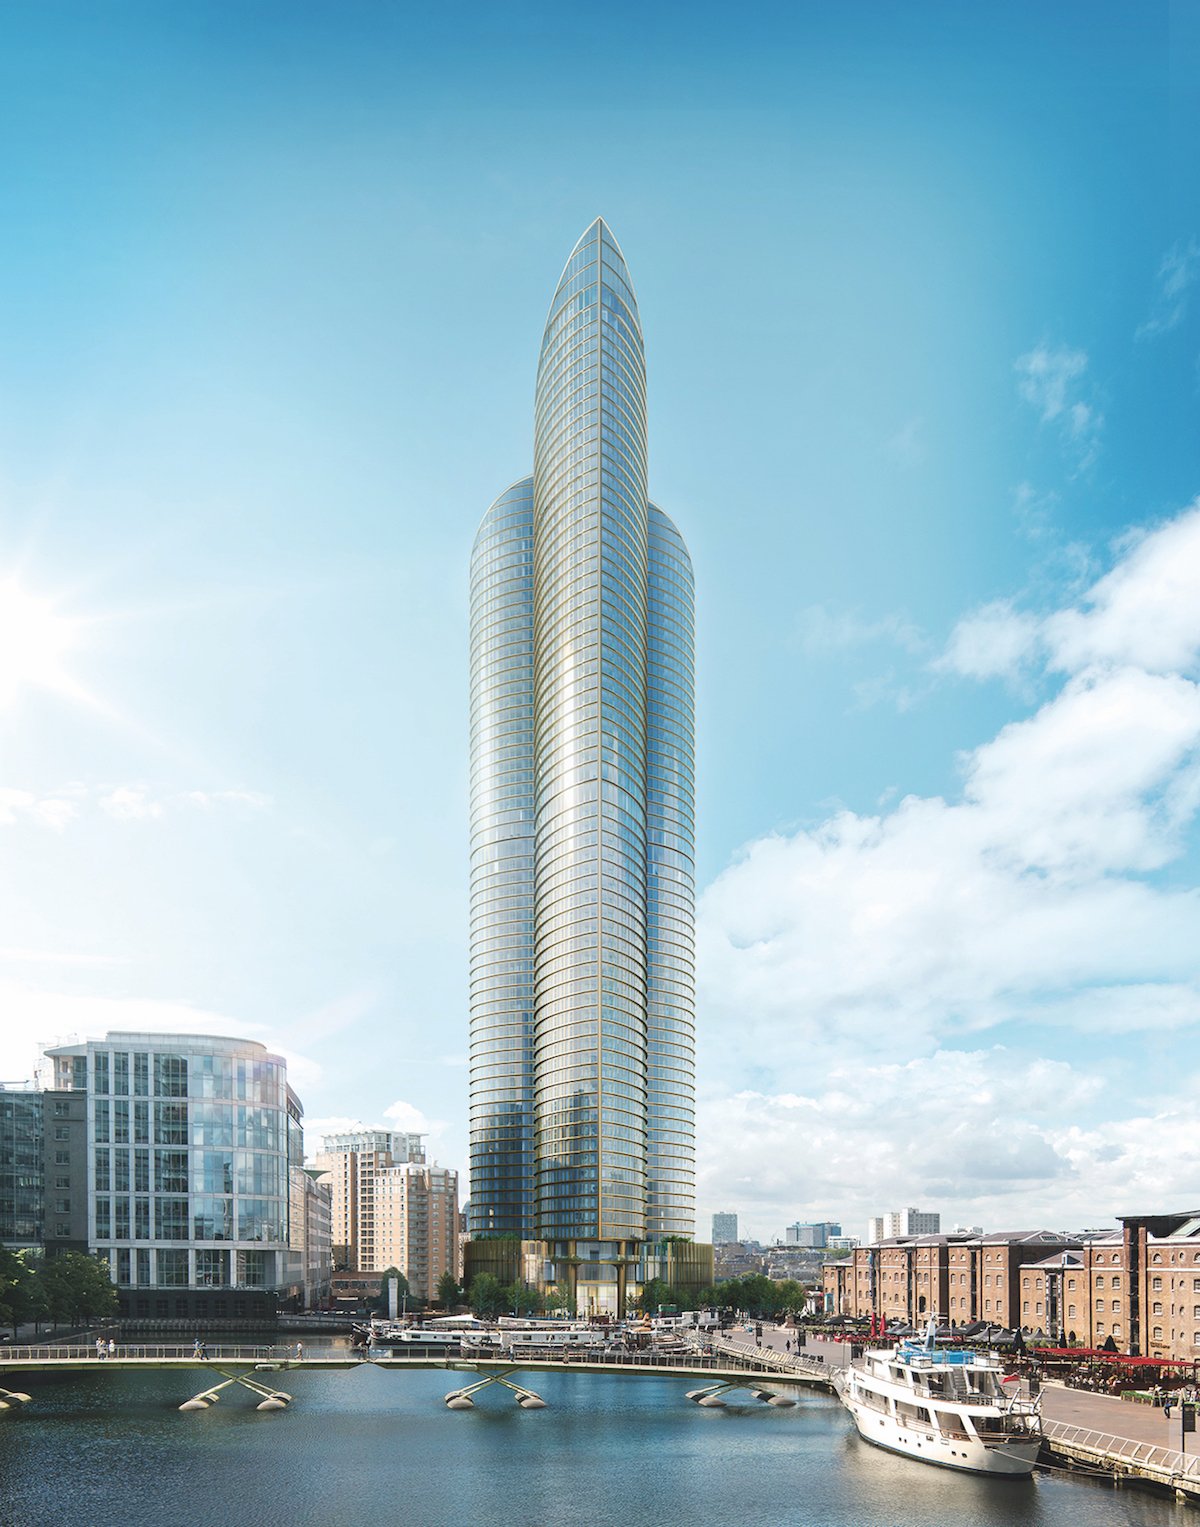 21 skyscrapers that will transform London's skyline by 2020 ...